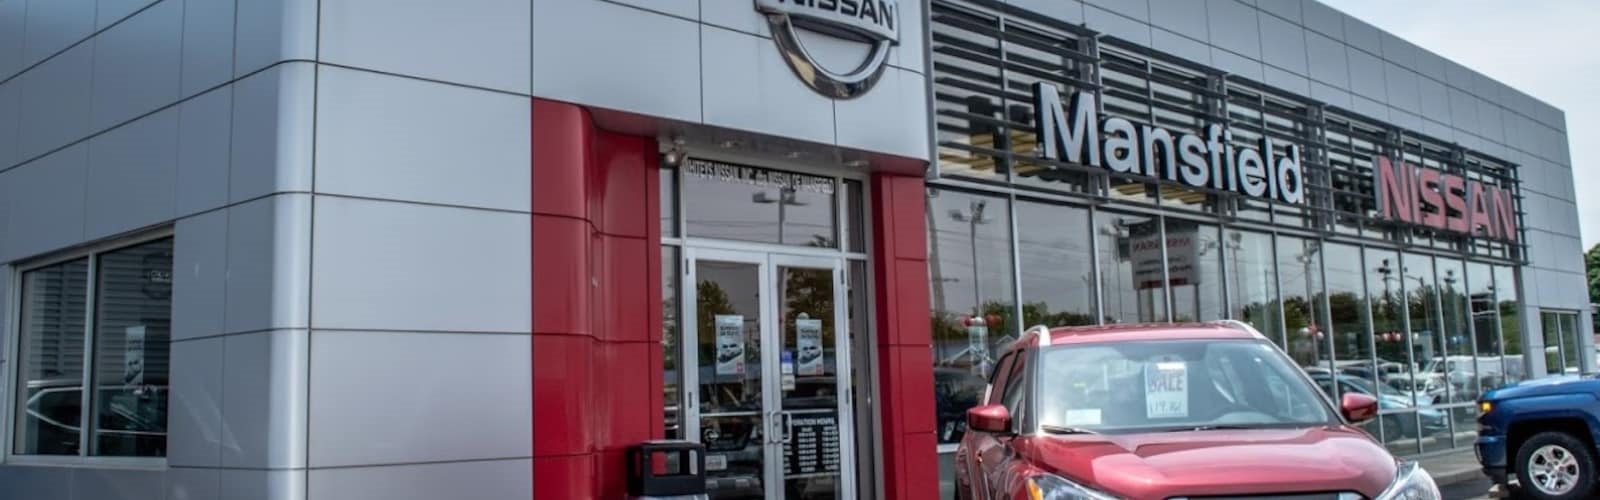 Nissan of Mansfield Ontario OH